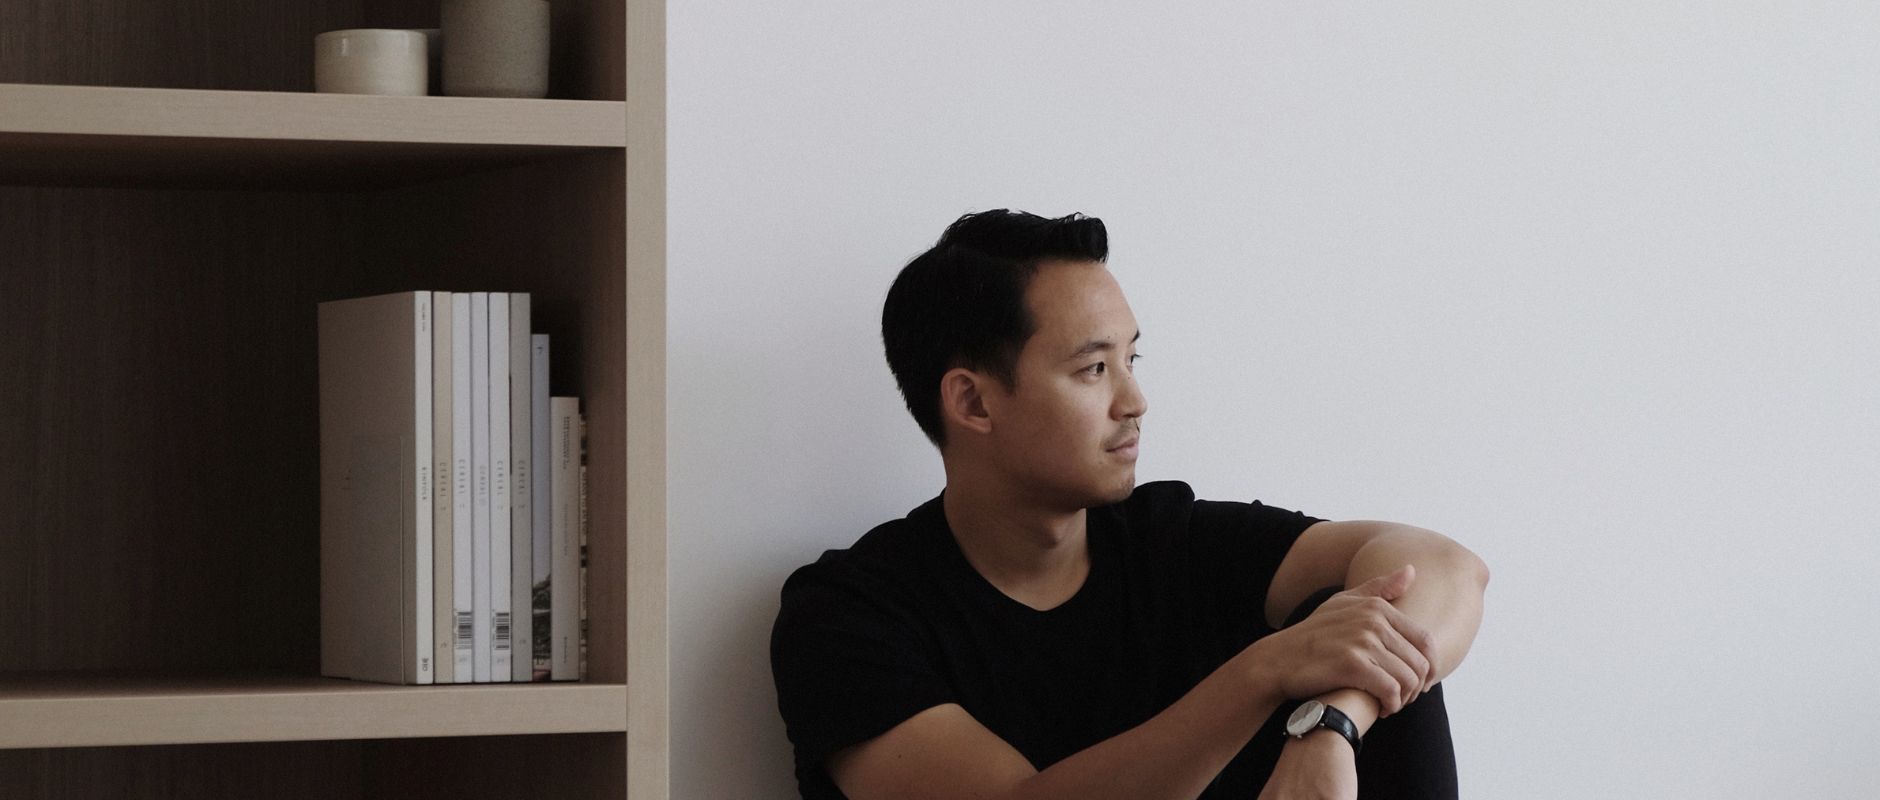 The photo is a profile shot of industrial designer, Jon Liow - the subject in this interview. He's wearing a black tee-shirt and is sitting casually on the ground with his arm resting on his knee. He's looking to the right hand side of the photo, and on his left is a bookshelf with a tidy stack of books on it.